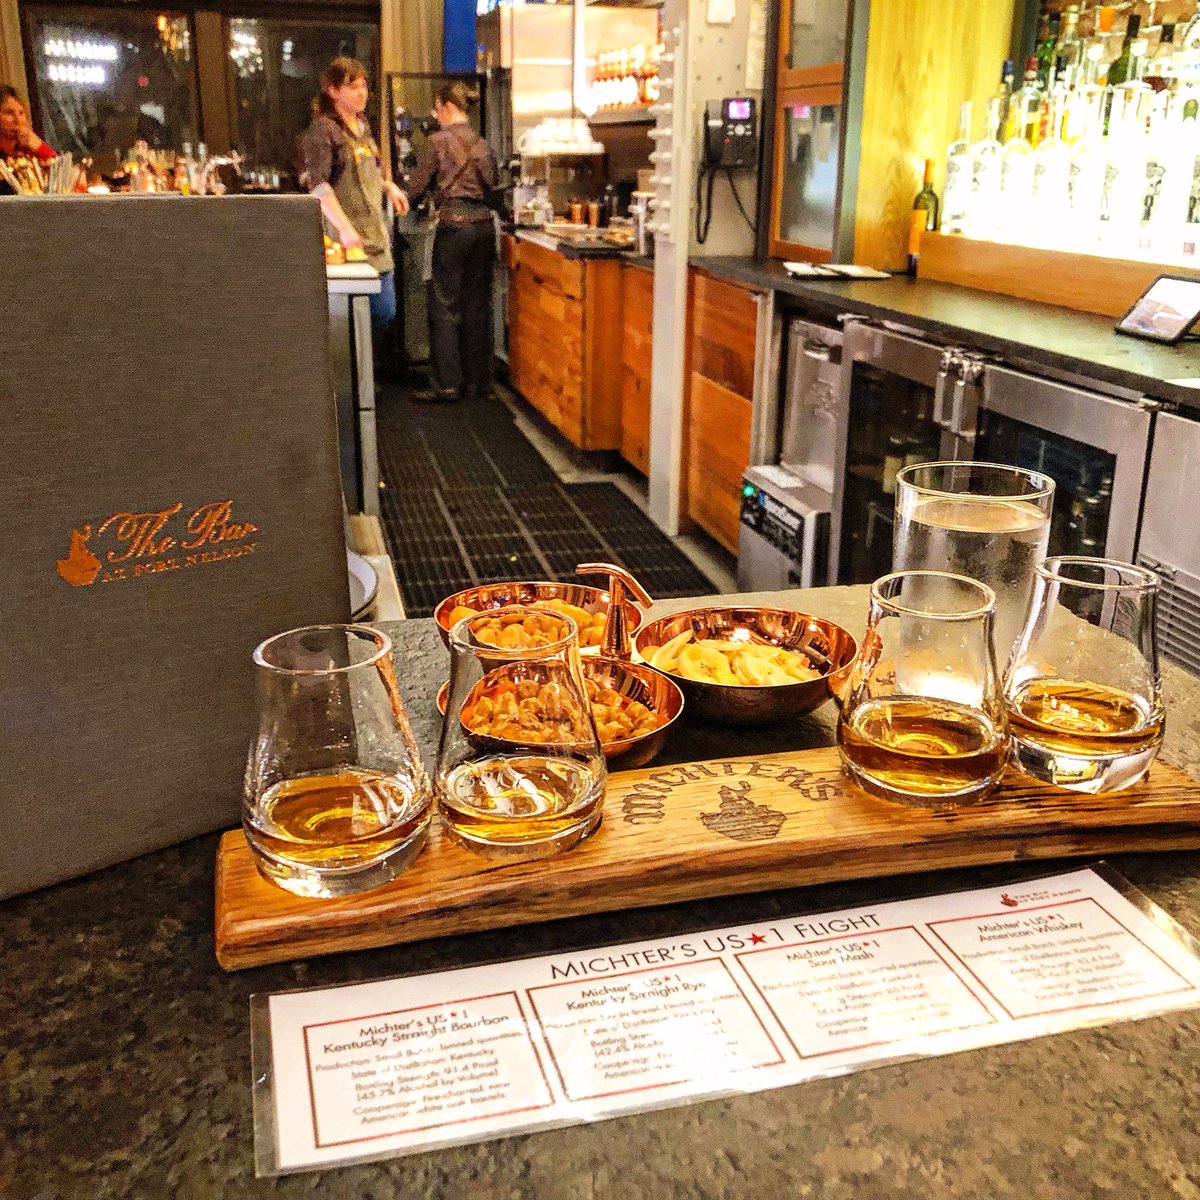 Bourbon Tasting At Fort Nelson… 
#travel #explore #whiskey #bourbon #weekendvibes #travelblogger #foodie #amex #bar #lounge #distillery #amexlife #downtownlouisville #louisville #kentucky